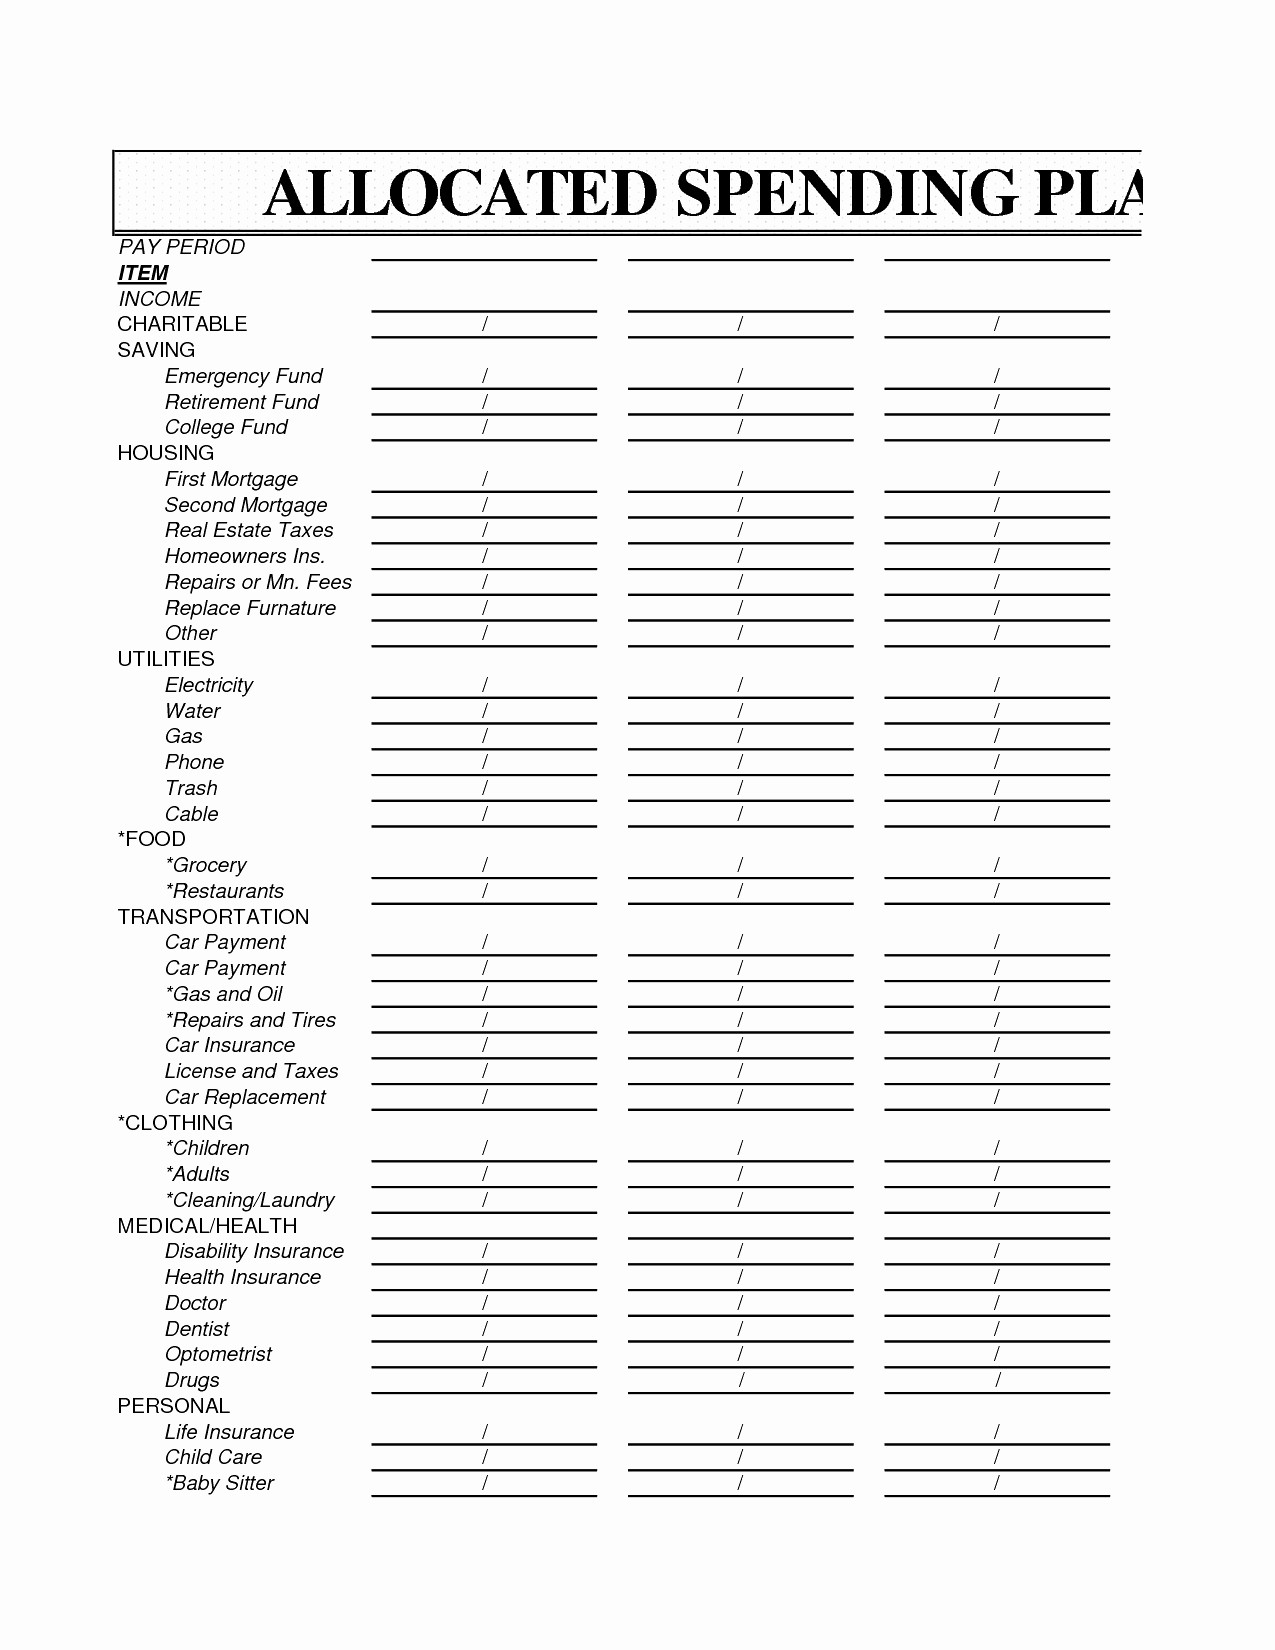 Allocated Spending Plan Form Awesome Dave Ramsey